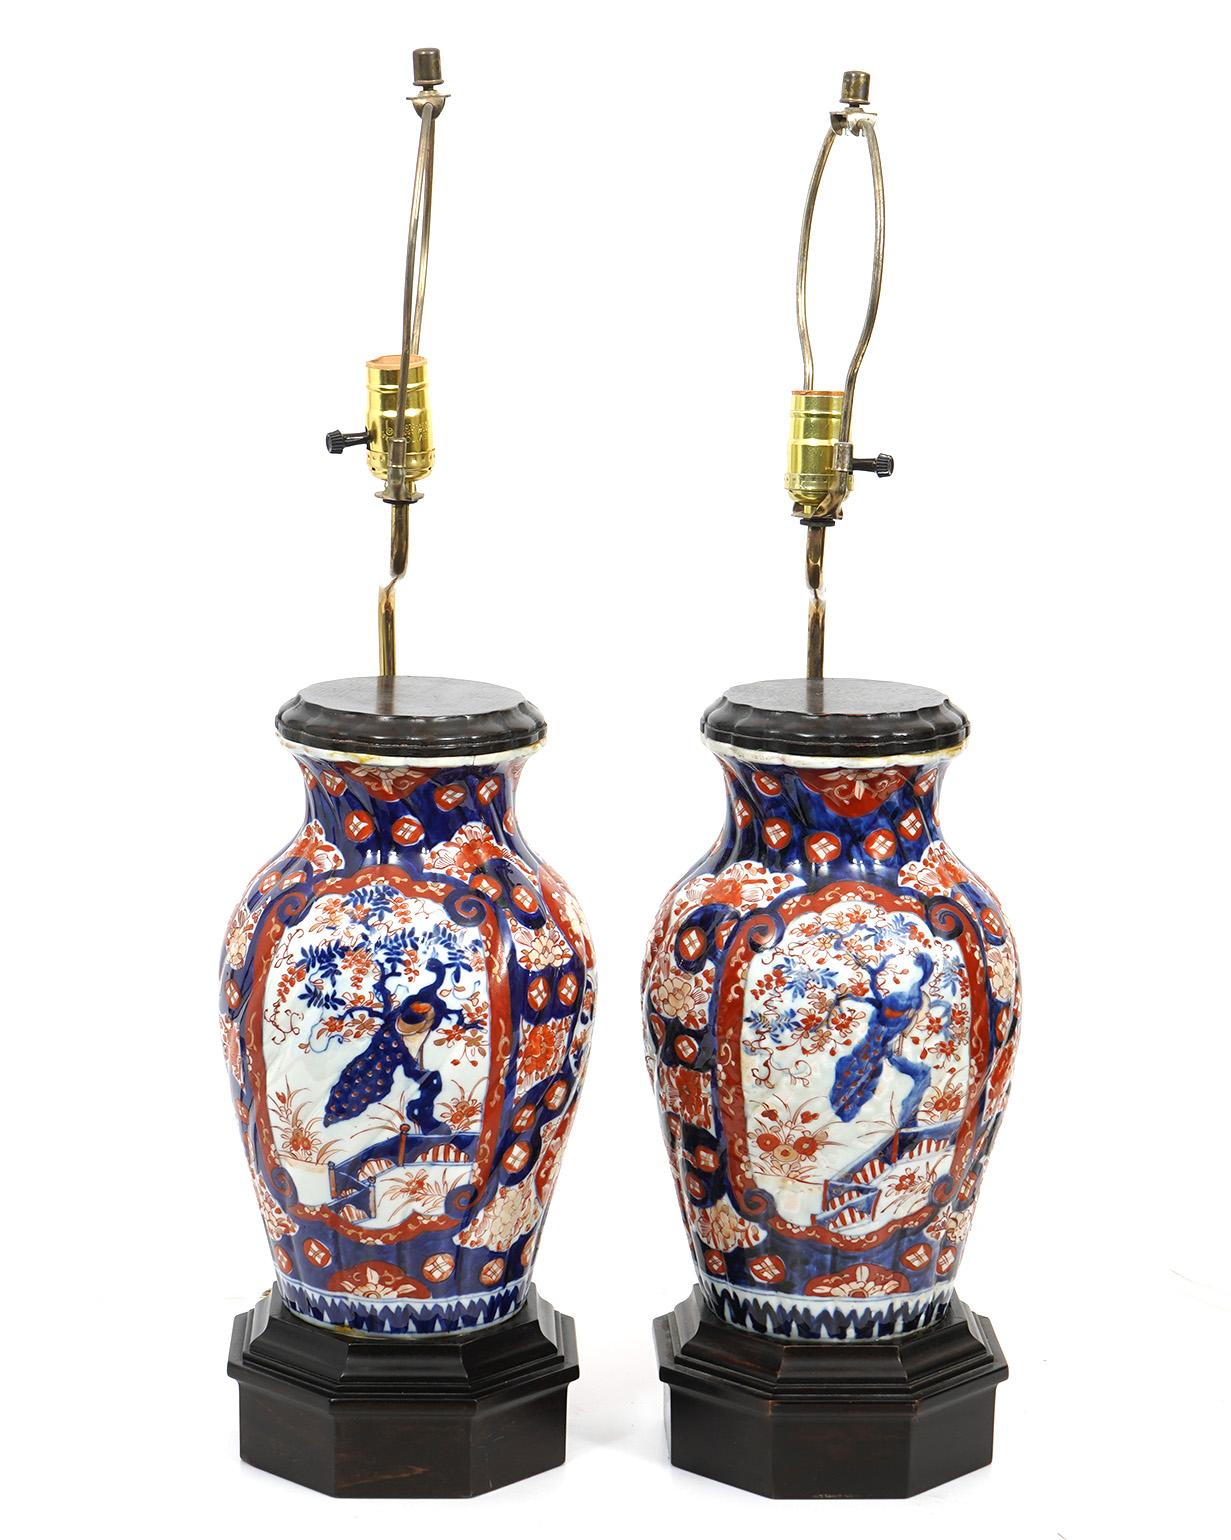 Nice pair of Antique Japanese Imari Lamps. Antique vases converted later to lamps. Direct from a Fisher Island, Maimi estate. Good condition with normal wear. Porcelain 12